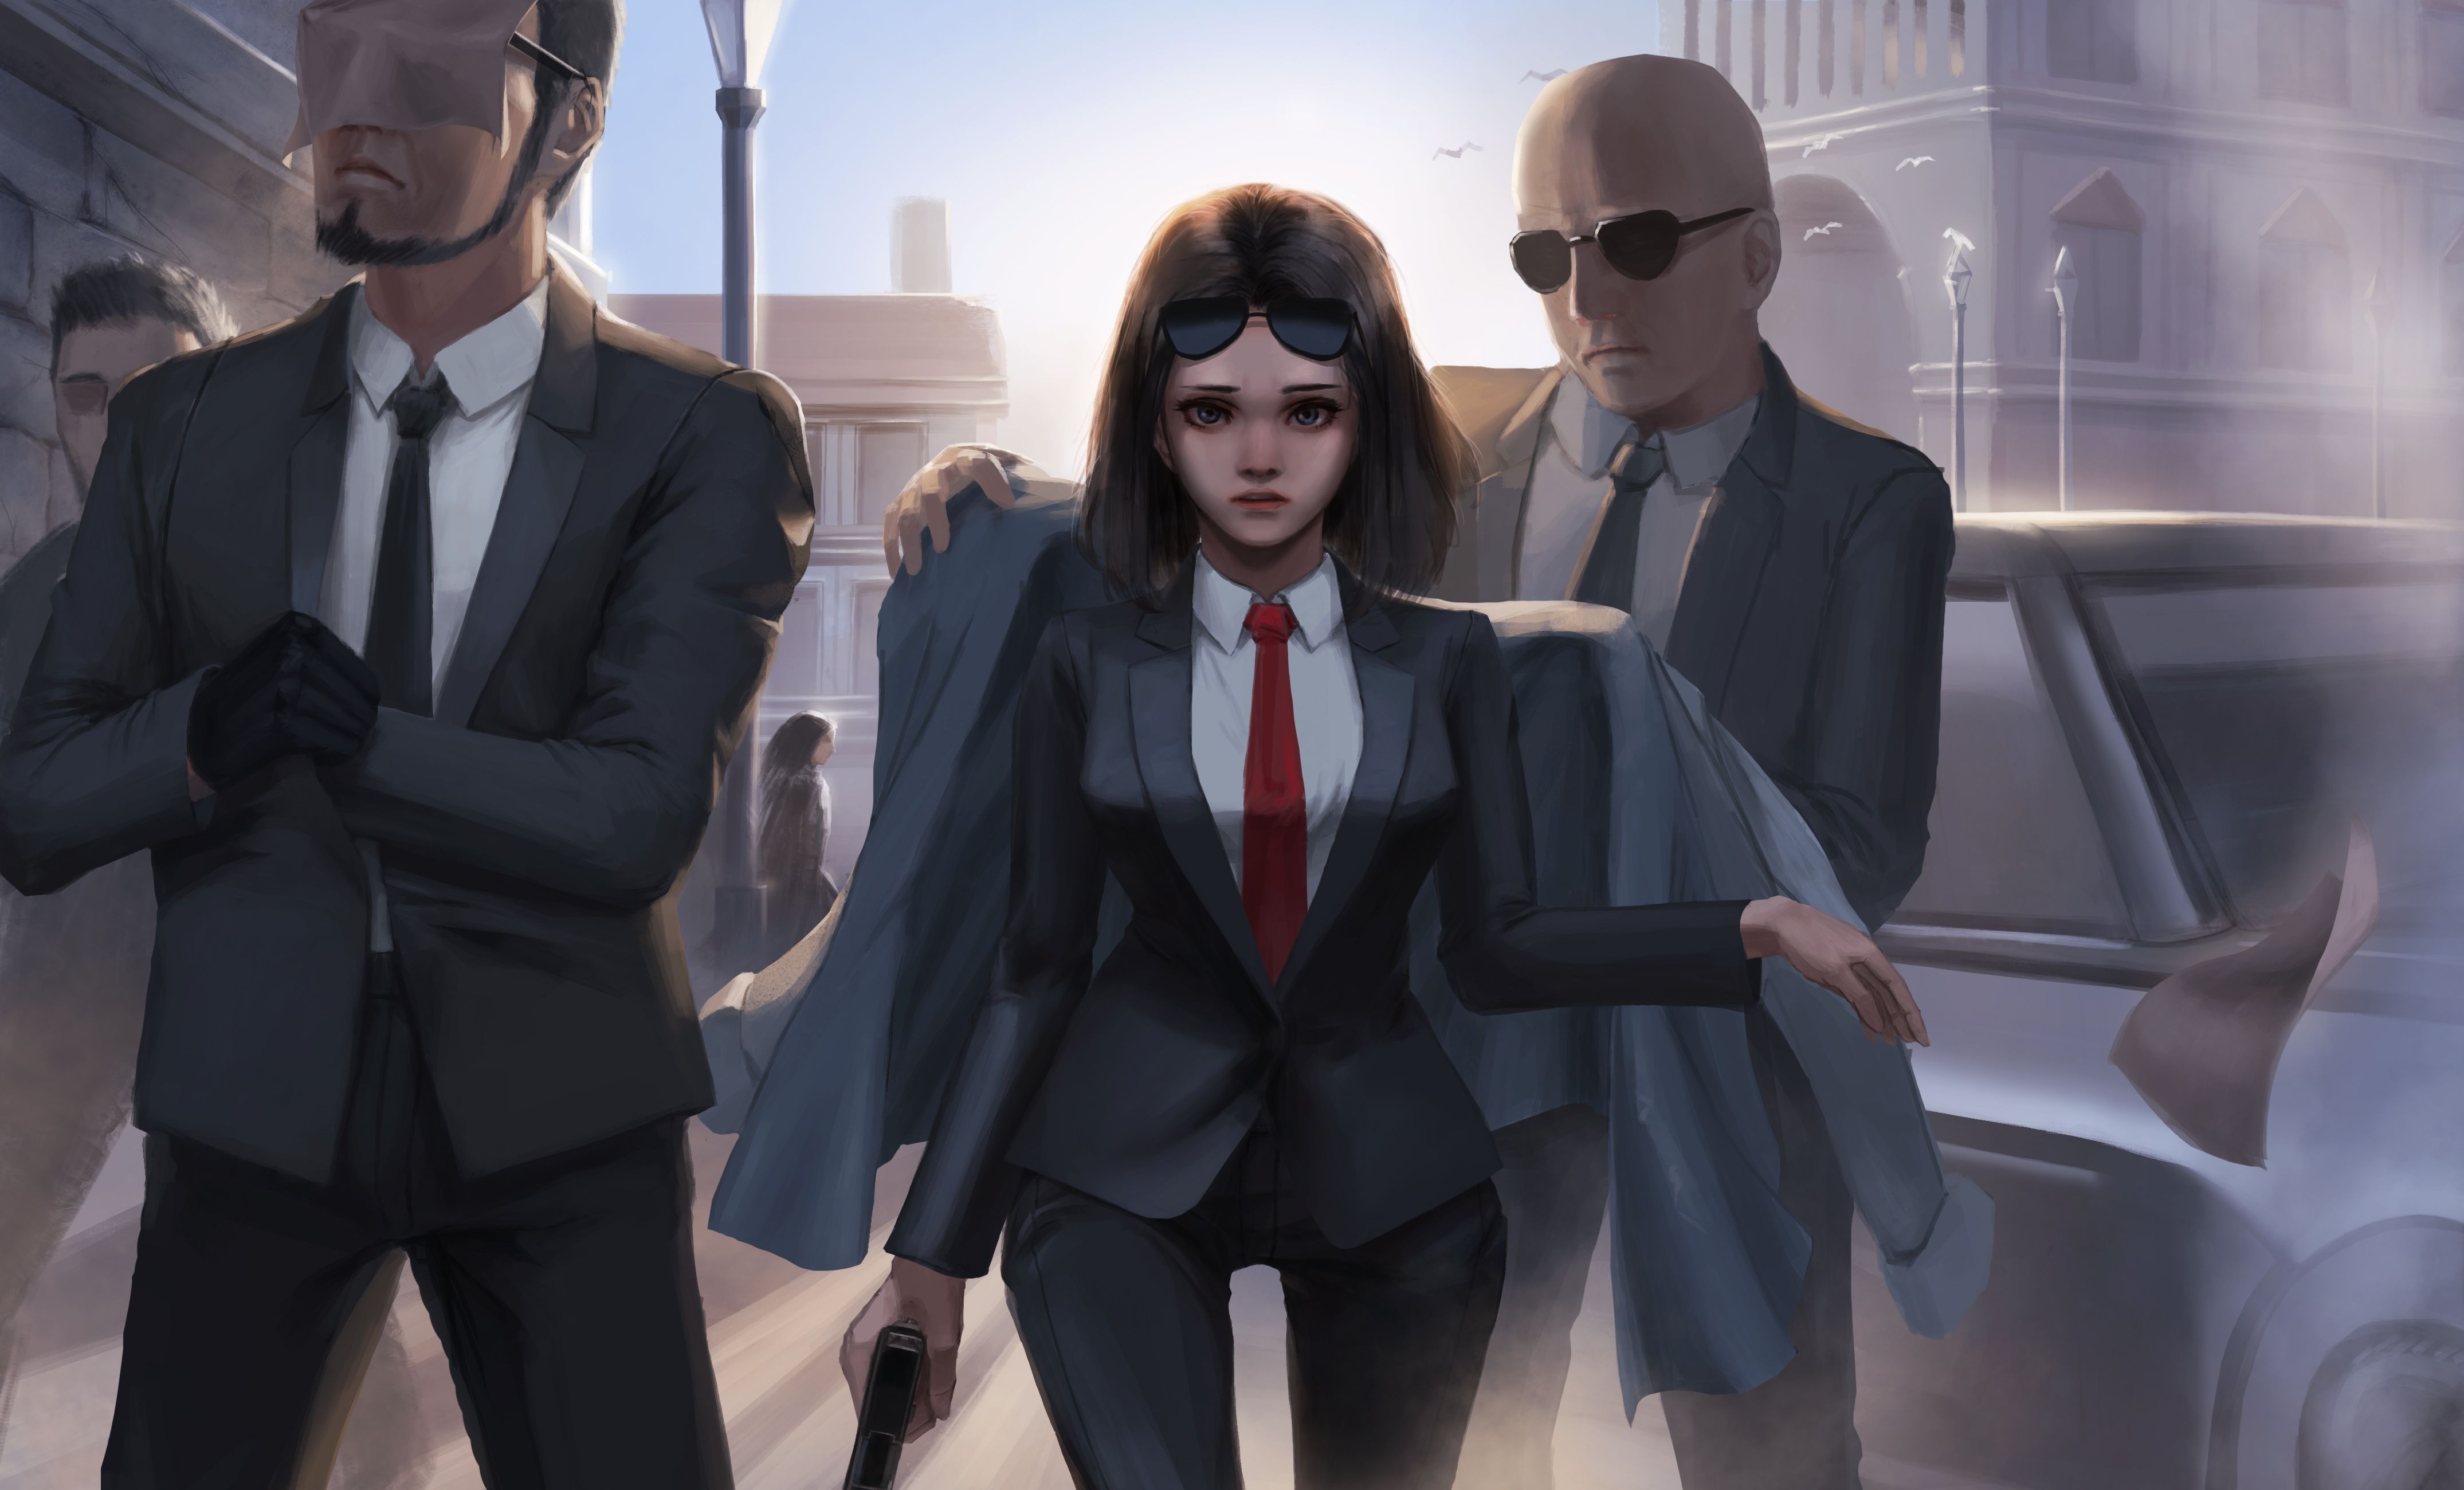 Download 4300x2600 Anime Girl In Suit, Bodyguards, Semi Realistic, Worried Expression Wallpaper